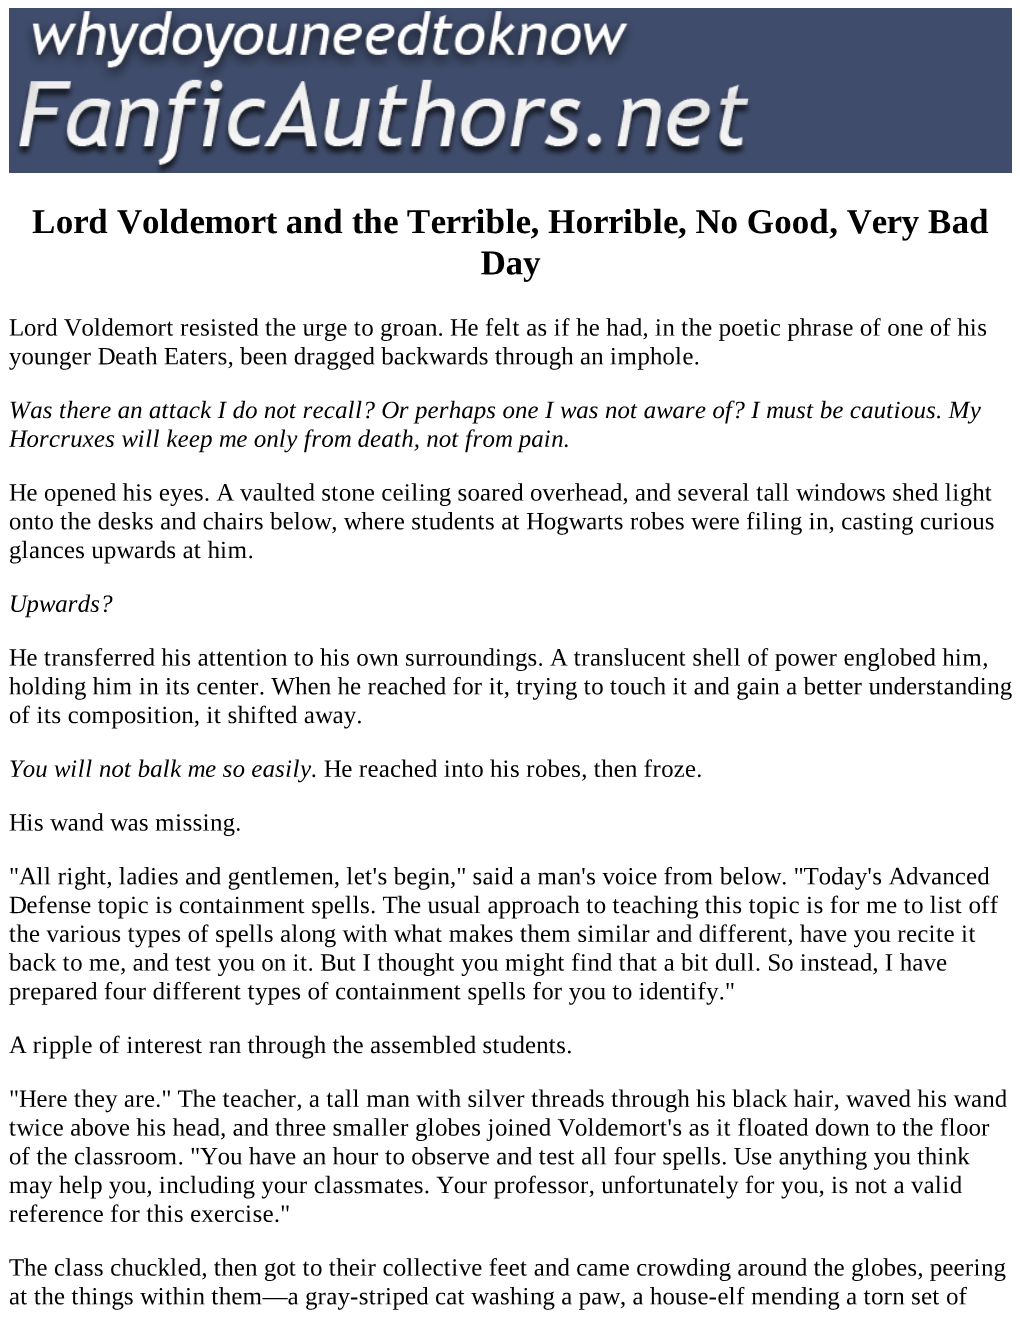 Lord Voldemort and the Terrible, Horrible, No Good, Very Bad Day